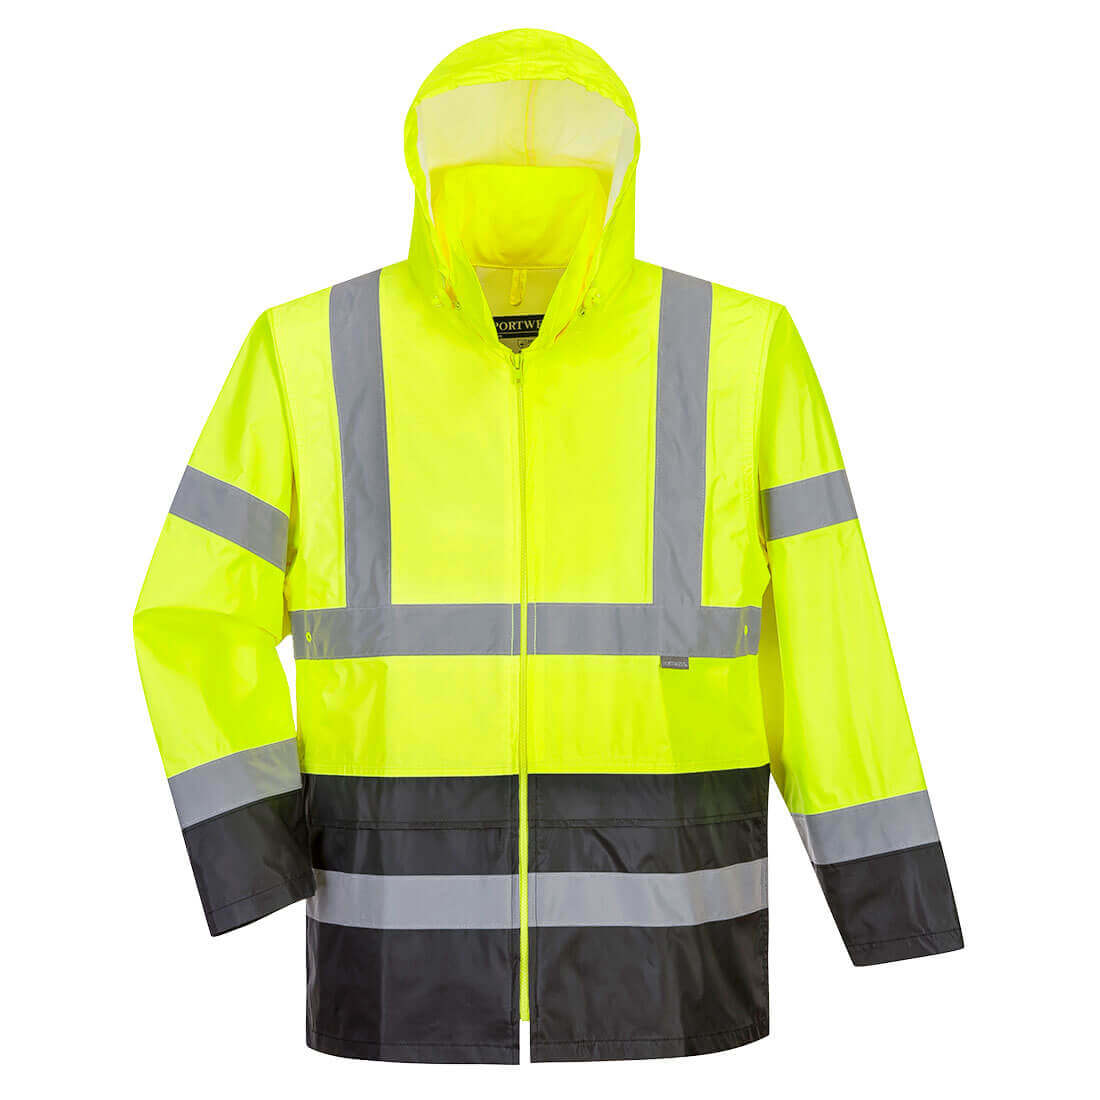 For maximum visibility, safety, and dryness during inclement weather, this lightweight, stylish two-tone jacket is an ideal choice!   hi-vis rainwear available at Baremotion